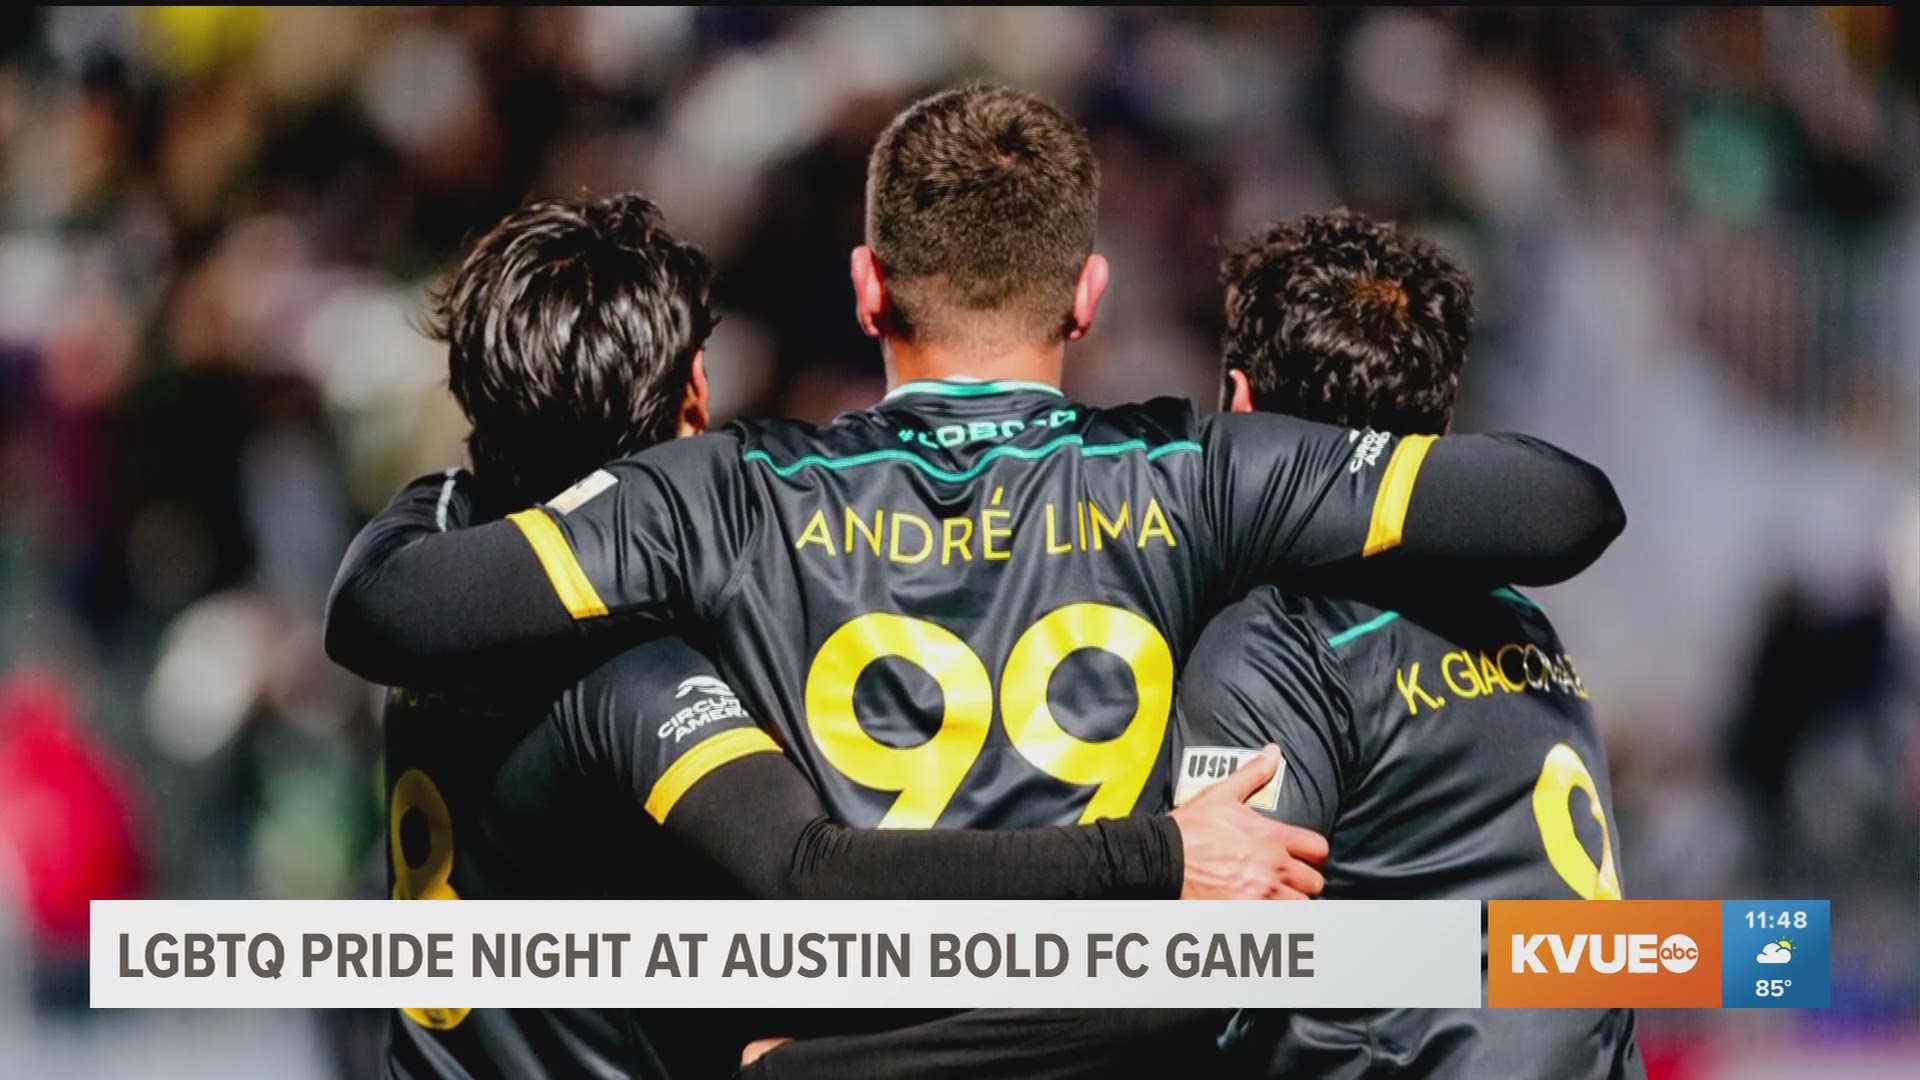 Austin Bold FC will be hosting a Pride night during its game against the Portland Timbers 2 on June 8 at 7:30 p.m.